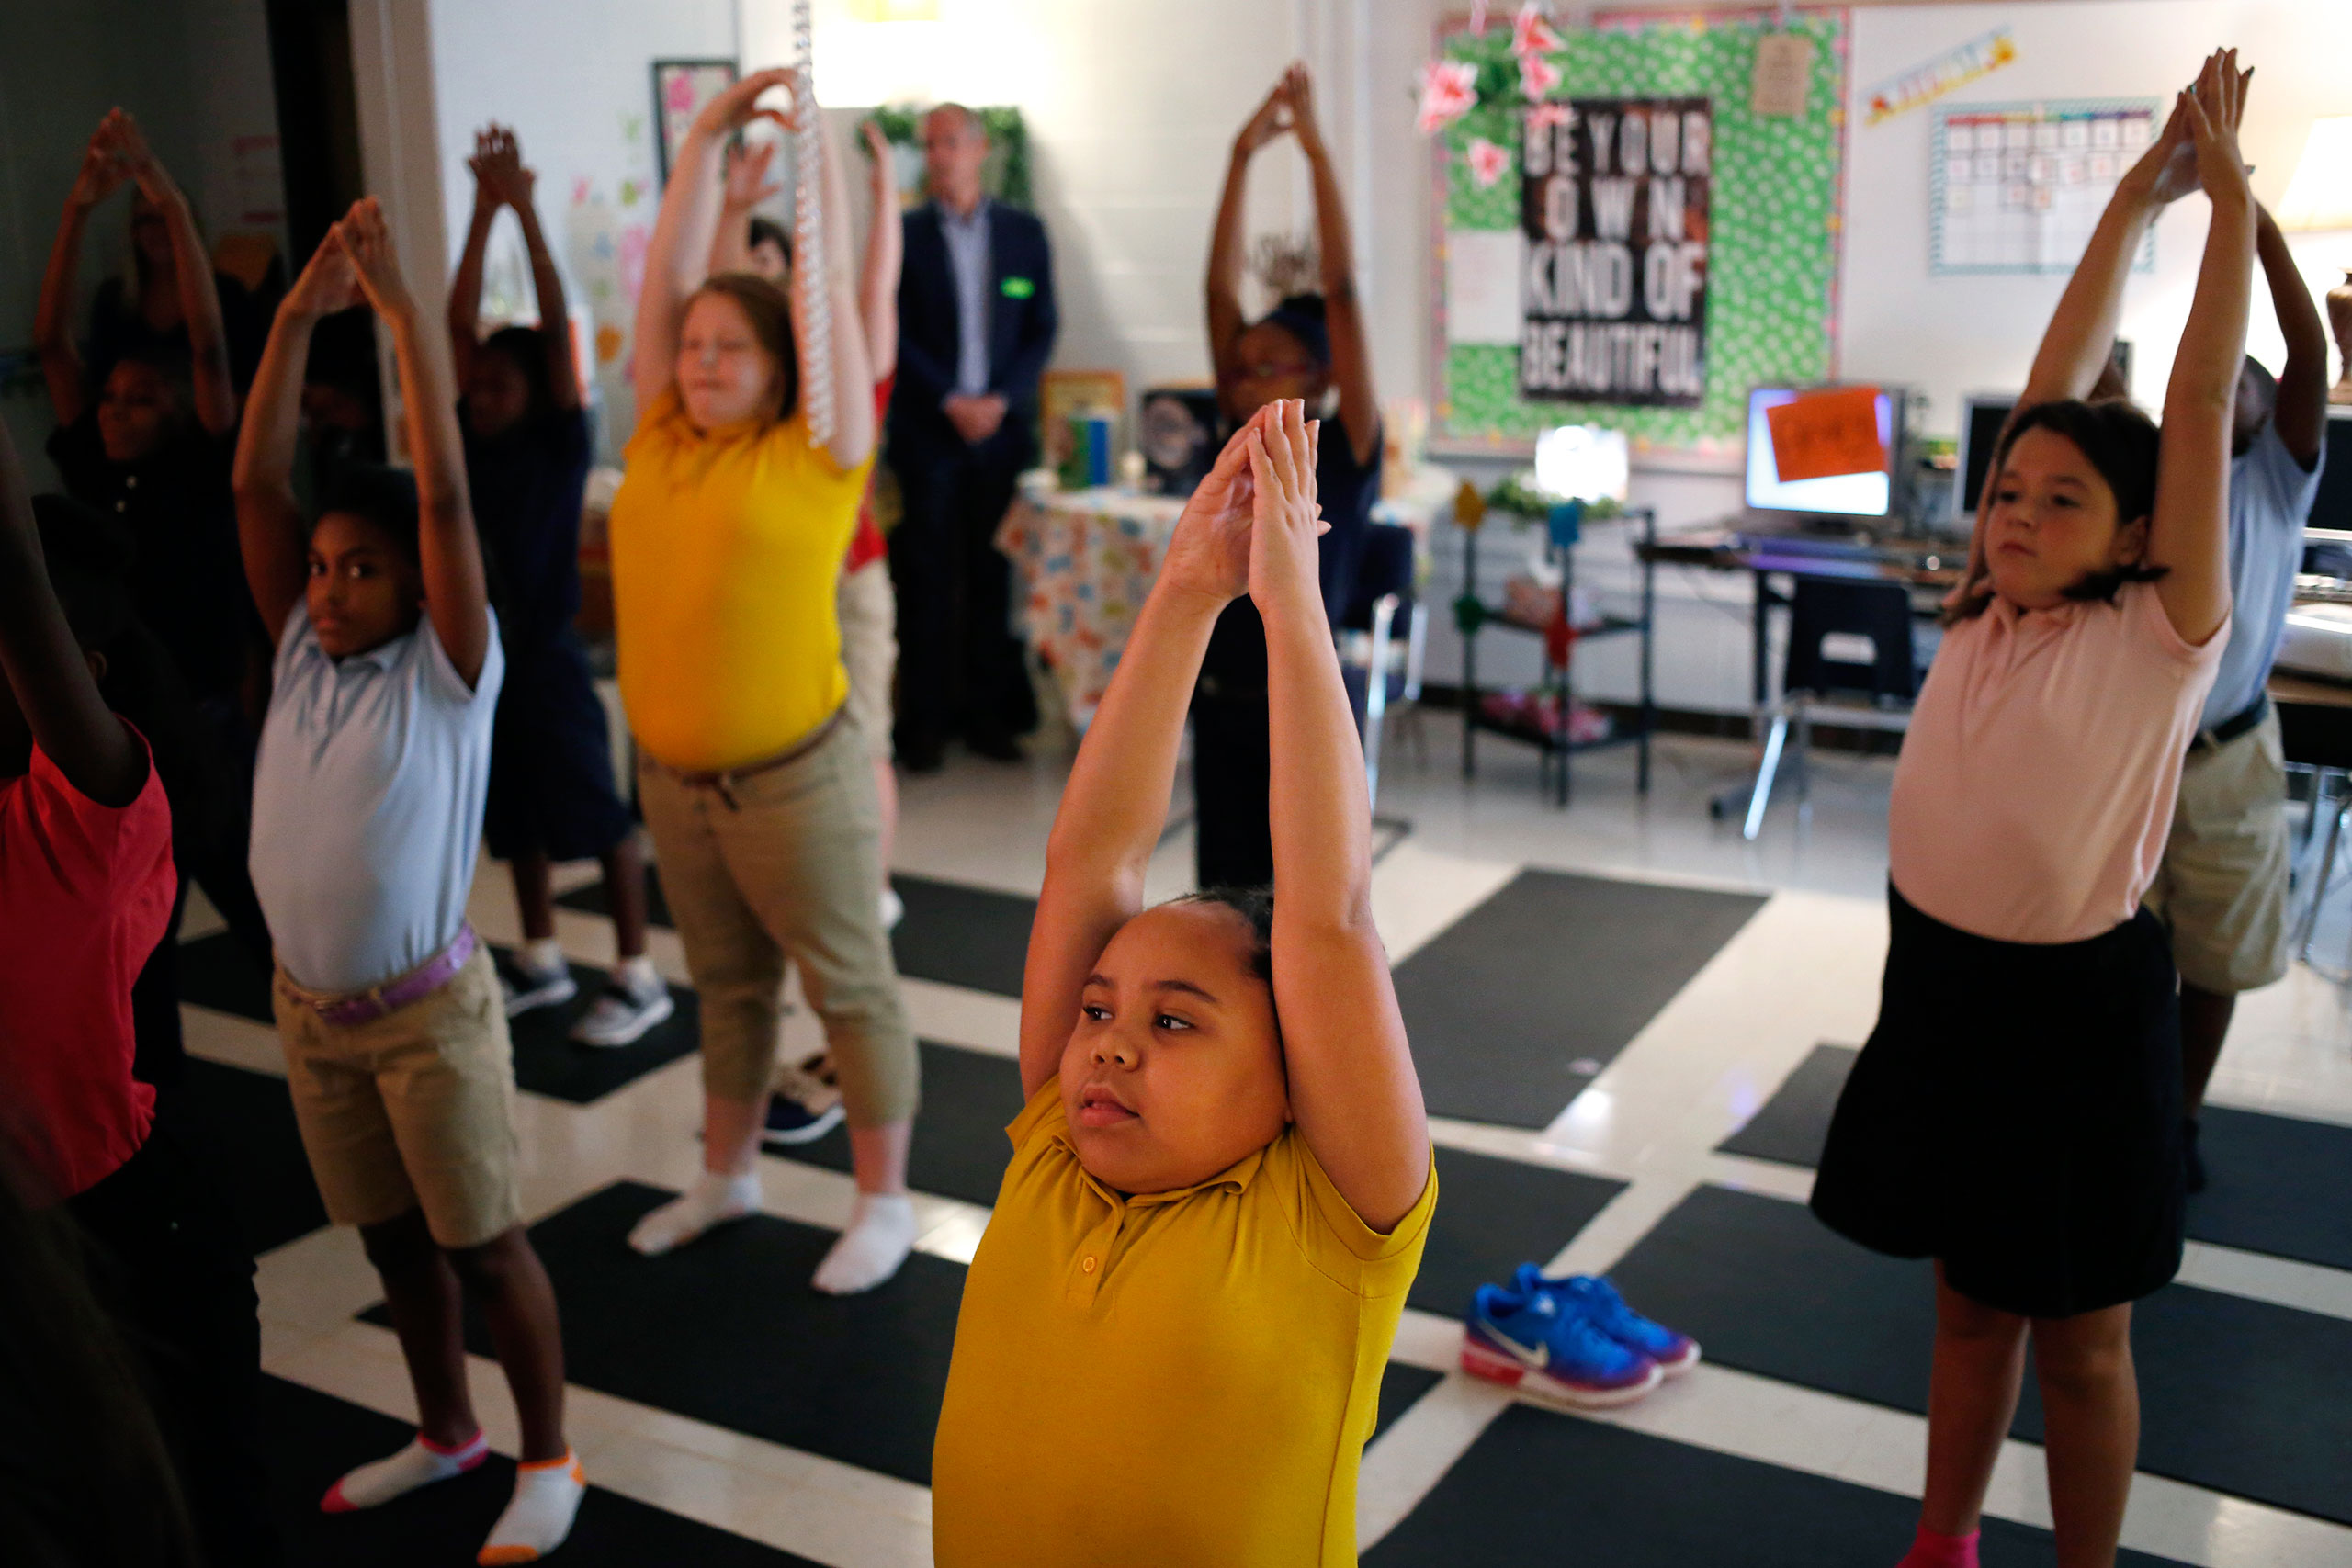 Fifth-graders flow through yoga-inspired poses in a mindfulness class at a public school in Louisville, Ky. (Luke Sharrett for TIME)